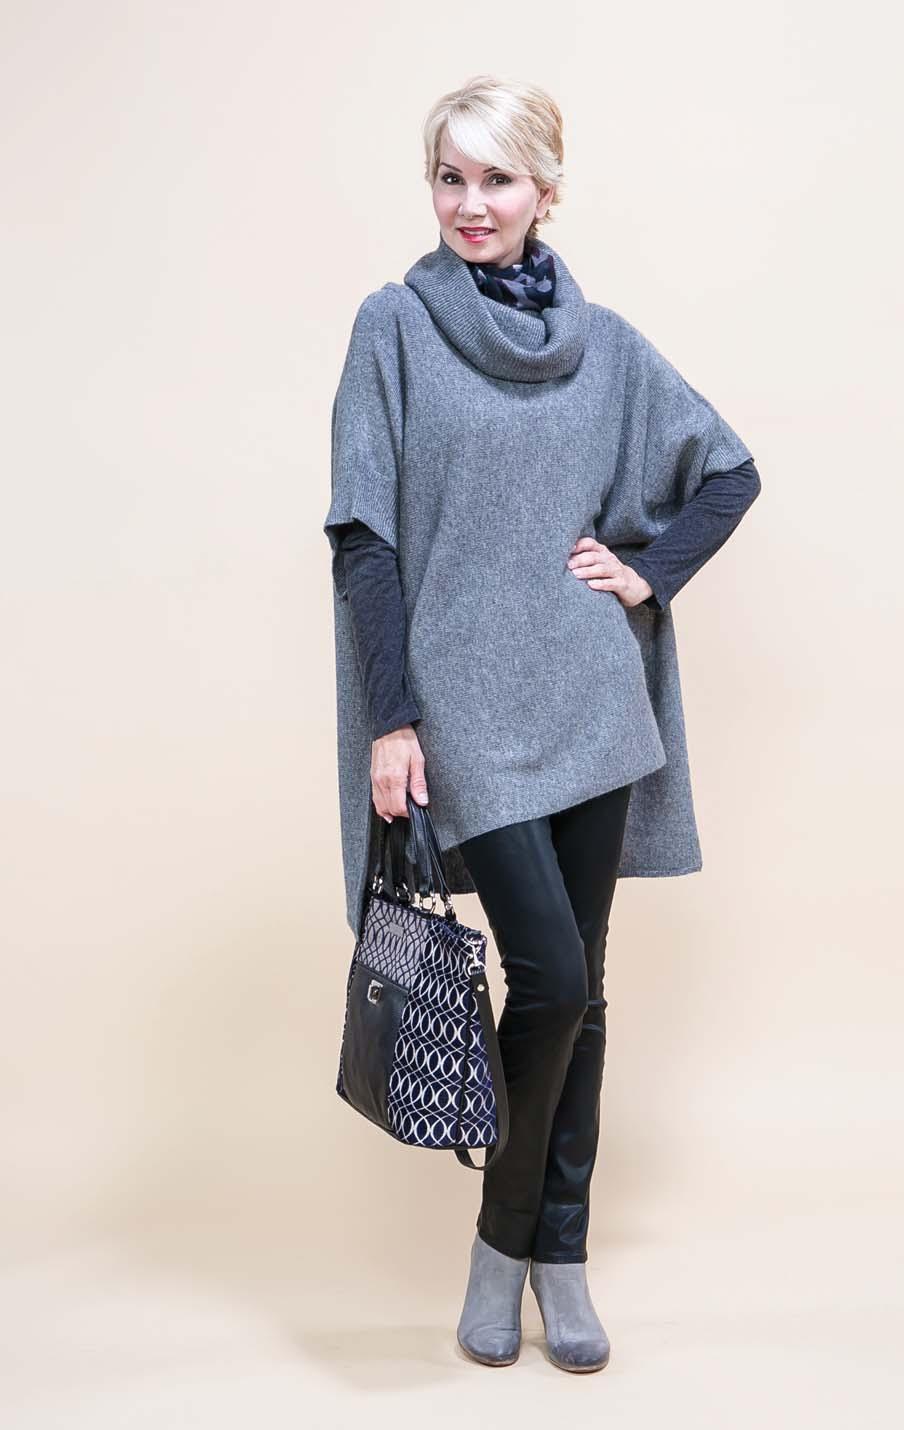 The Knit Topper of The Season! PORTOLANO OF ITALY wool/cashmere knit tunic with cowl neck. Grey, black, moonrock (taupe).